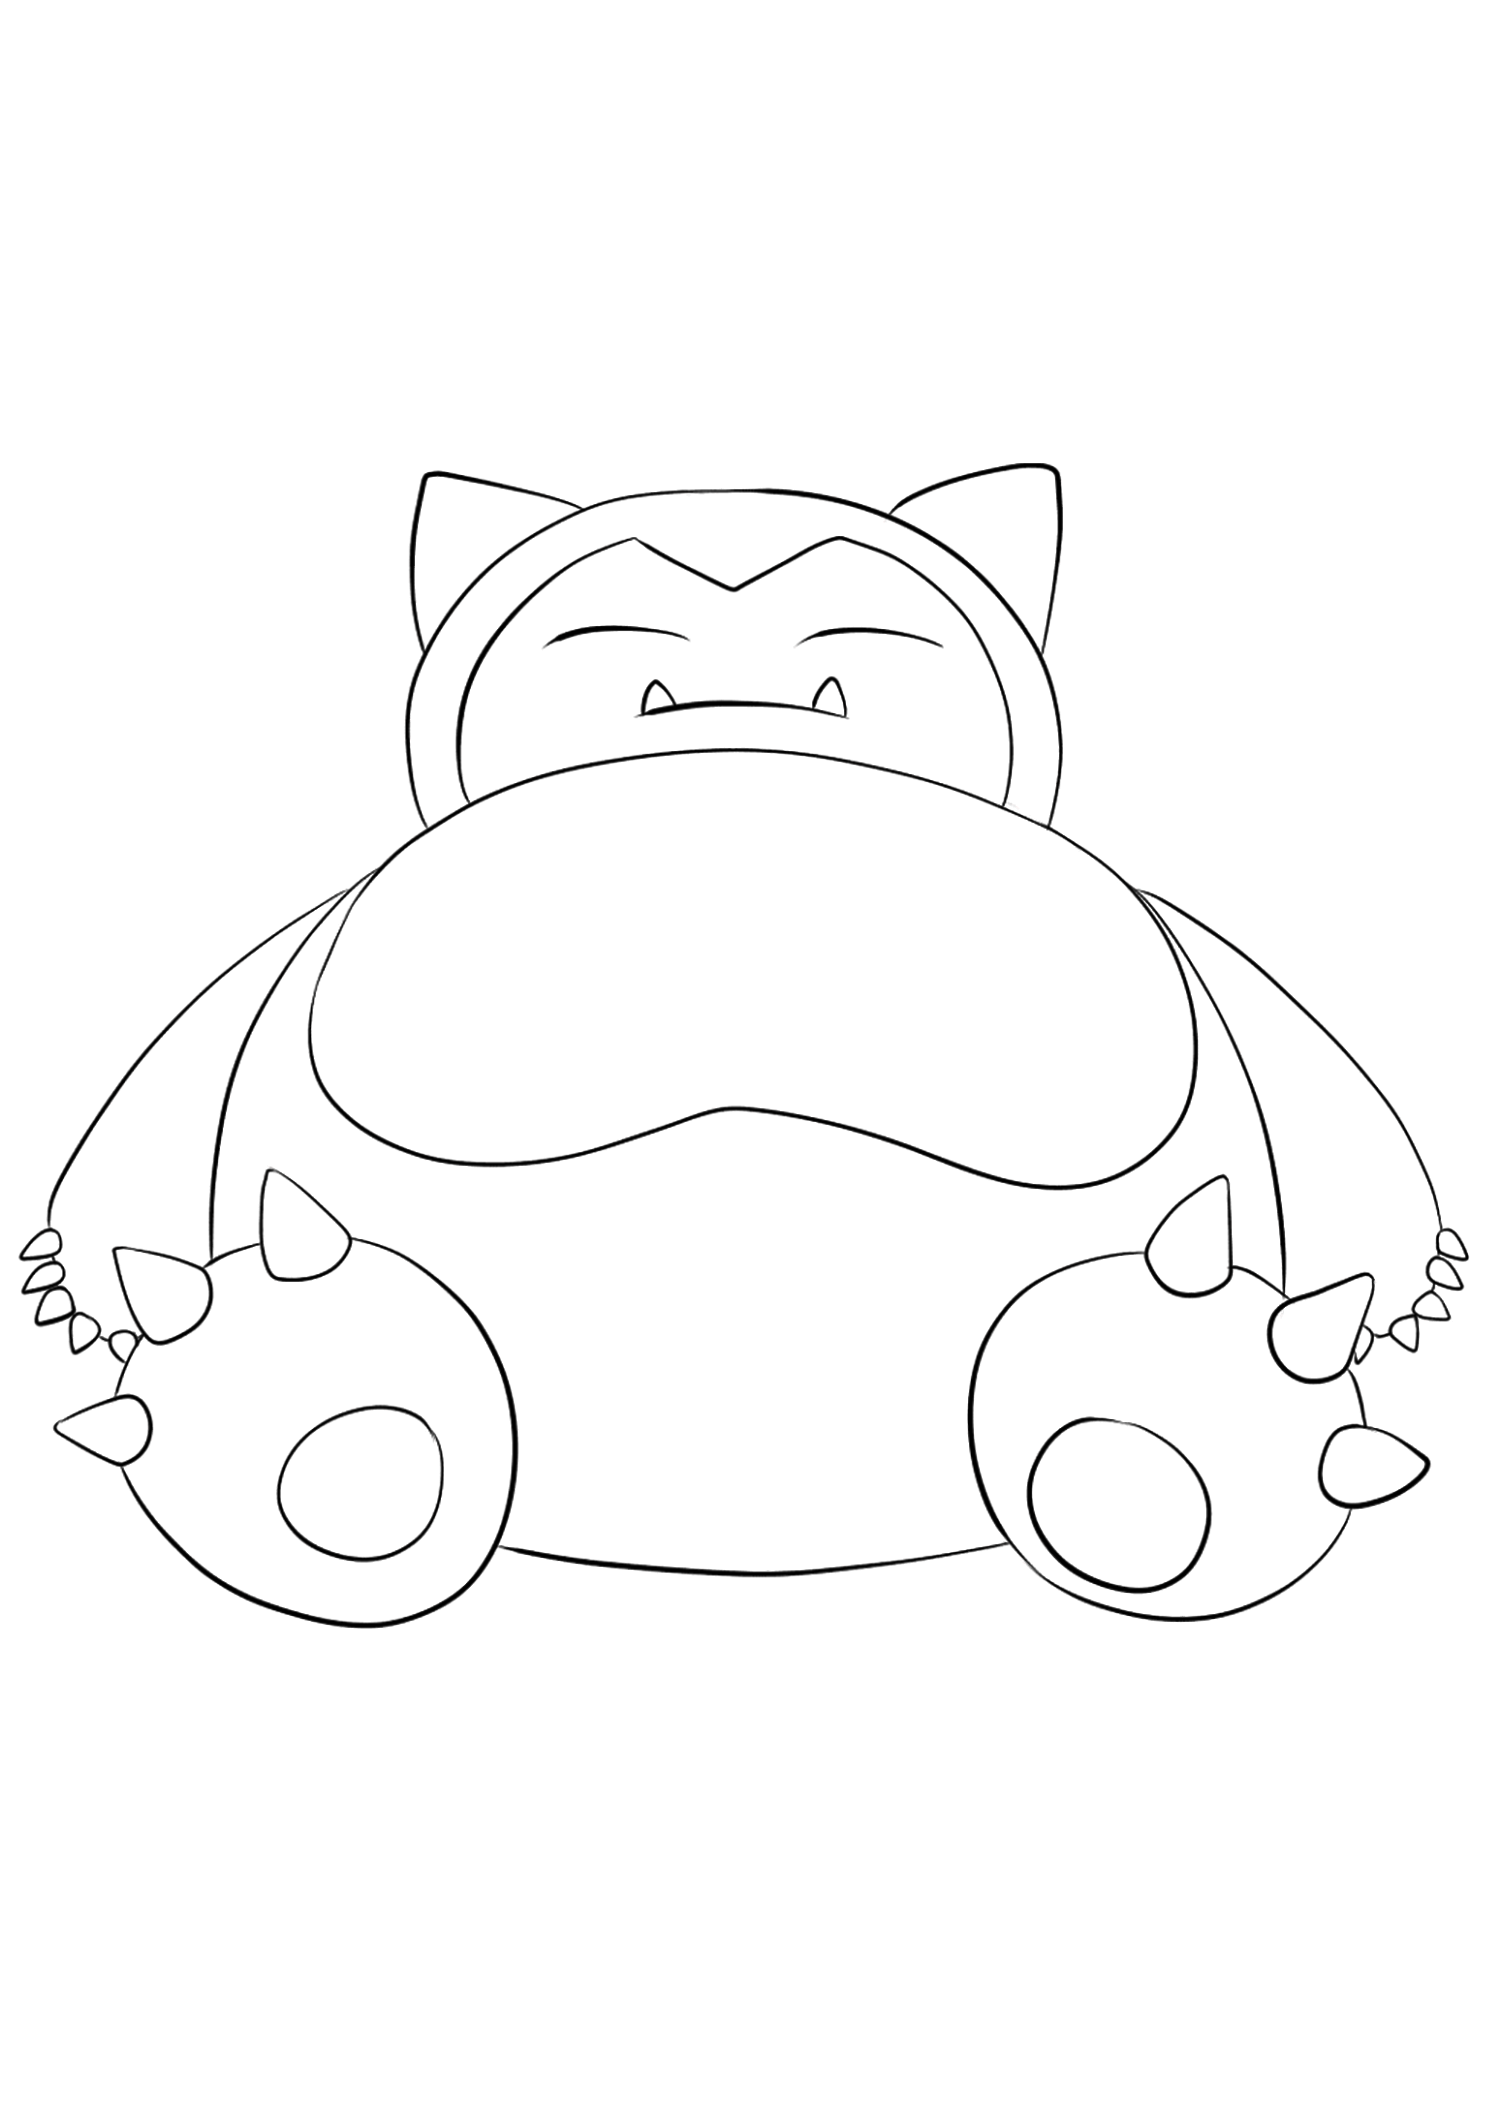 Snorlax (No.143). Snorlax Coloring page, Generation I Pokemon of type NormalOriginal image credit: Pokemon linearts by Lilly Gerbil on Deviantart.Permission:  All rights reserved © Pokemon company and Ken Sugimori.